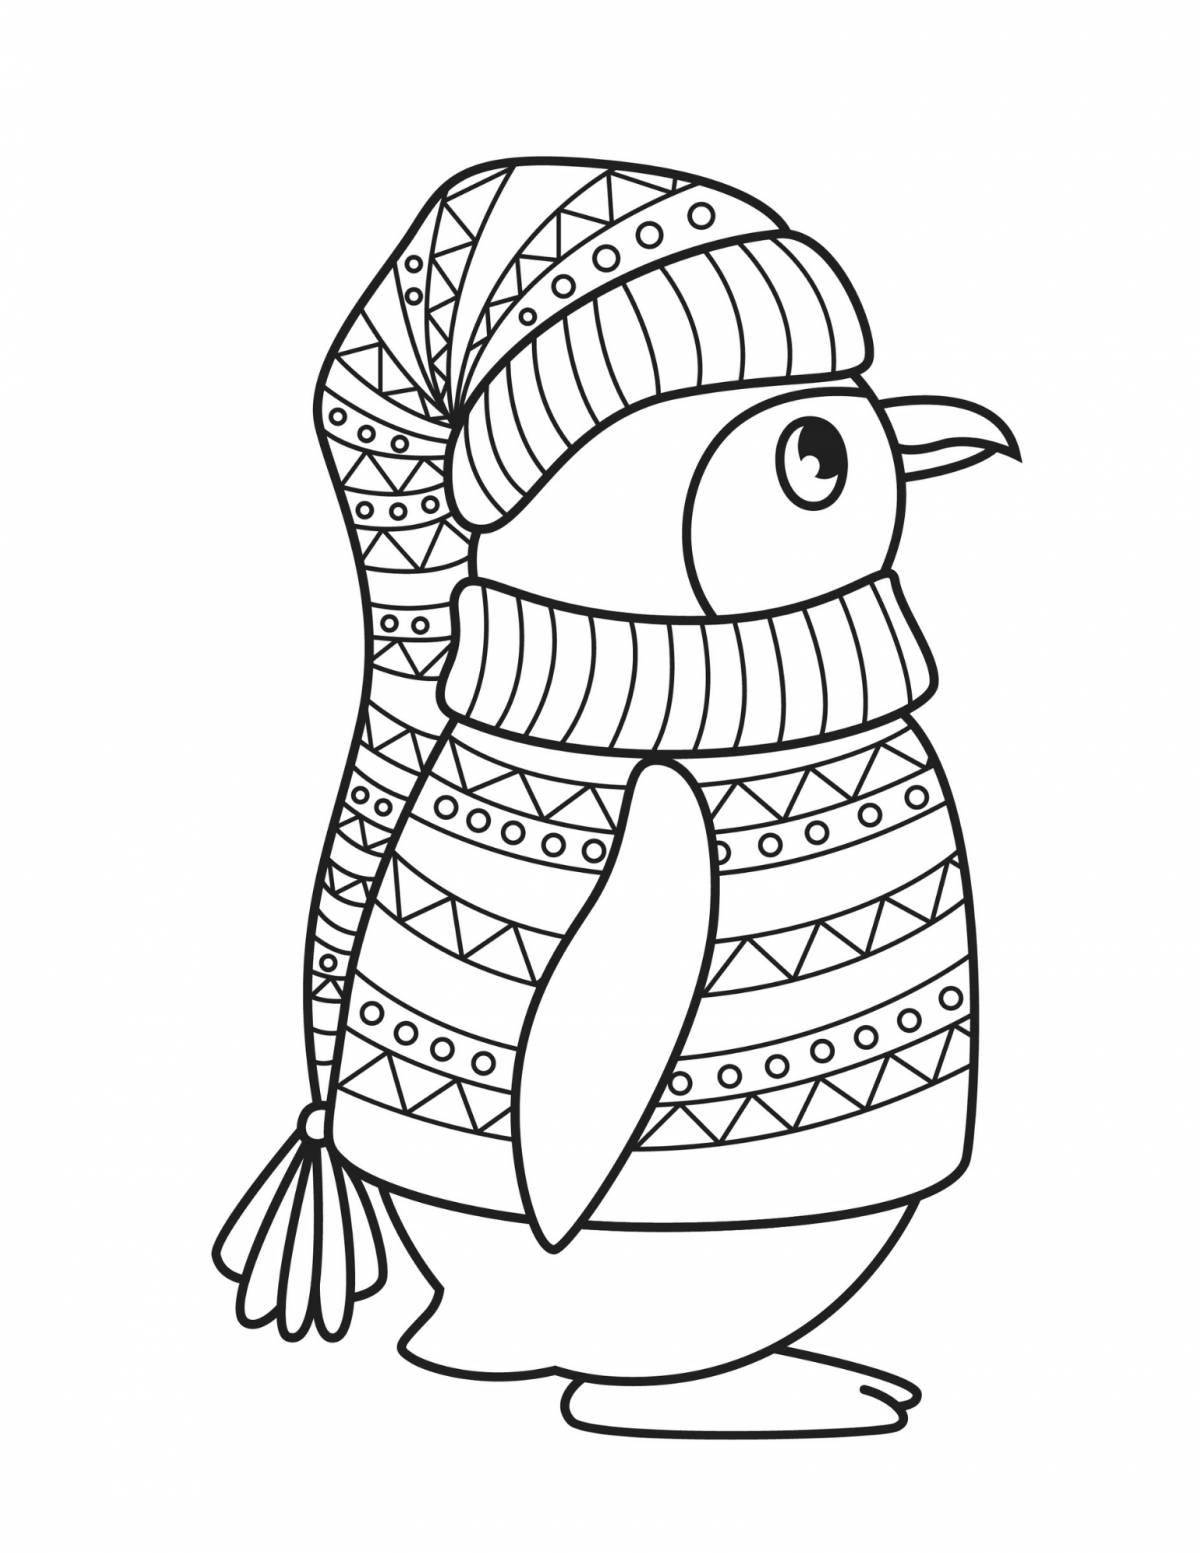 Energetic penguin with a hat